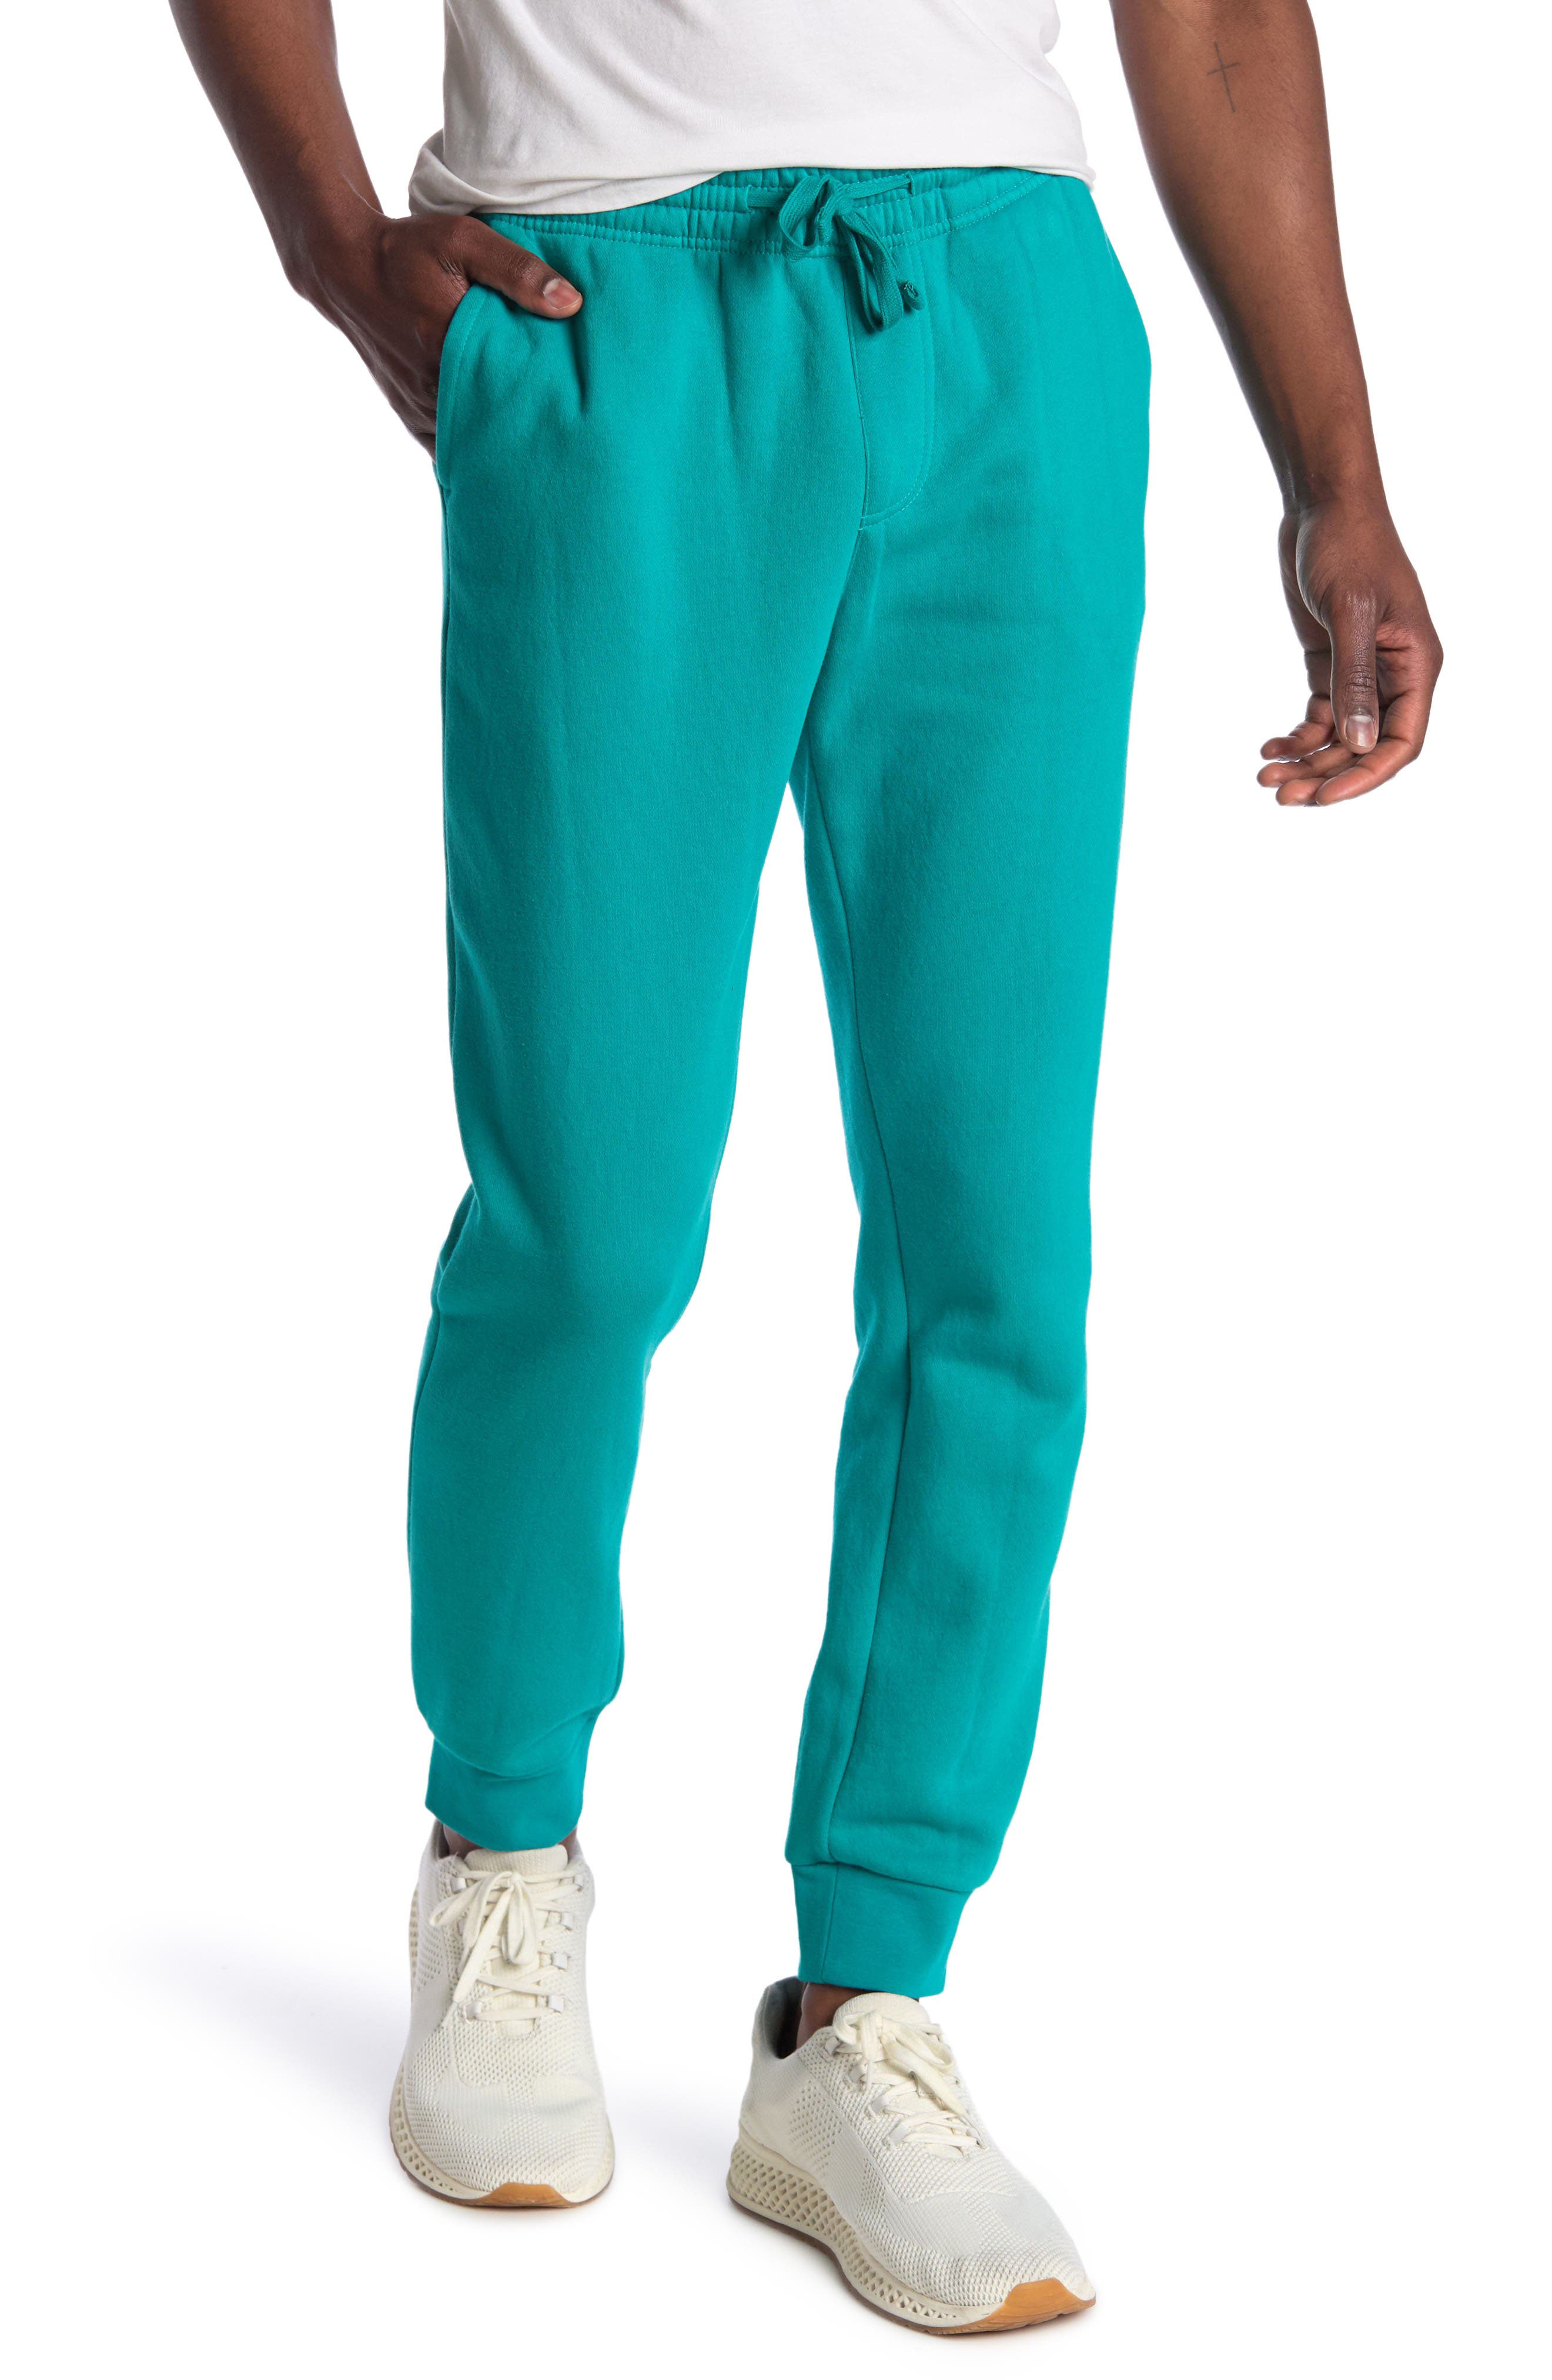 Abound Fleece Knit Drawstring Joggers In Turquoise/aqua